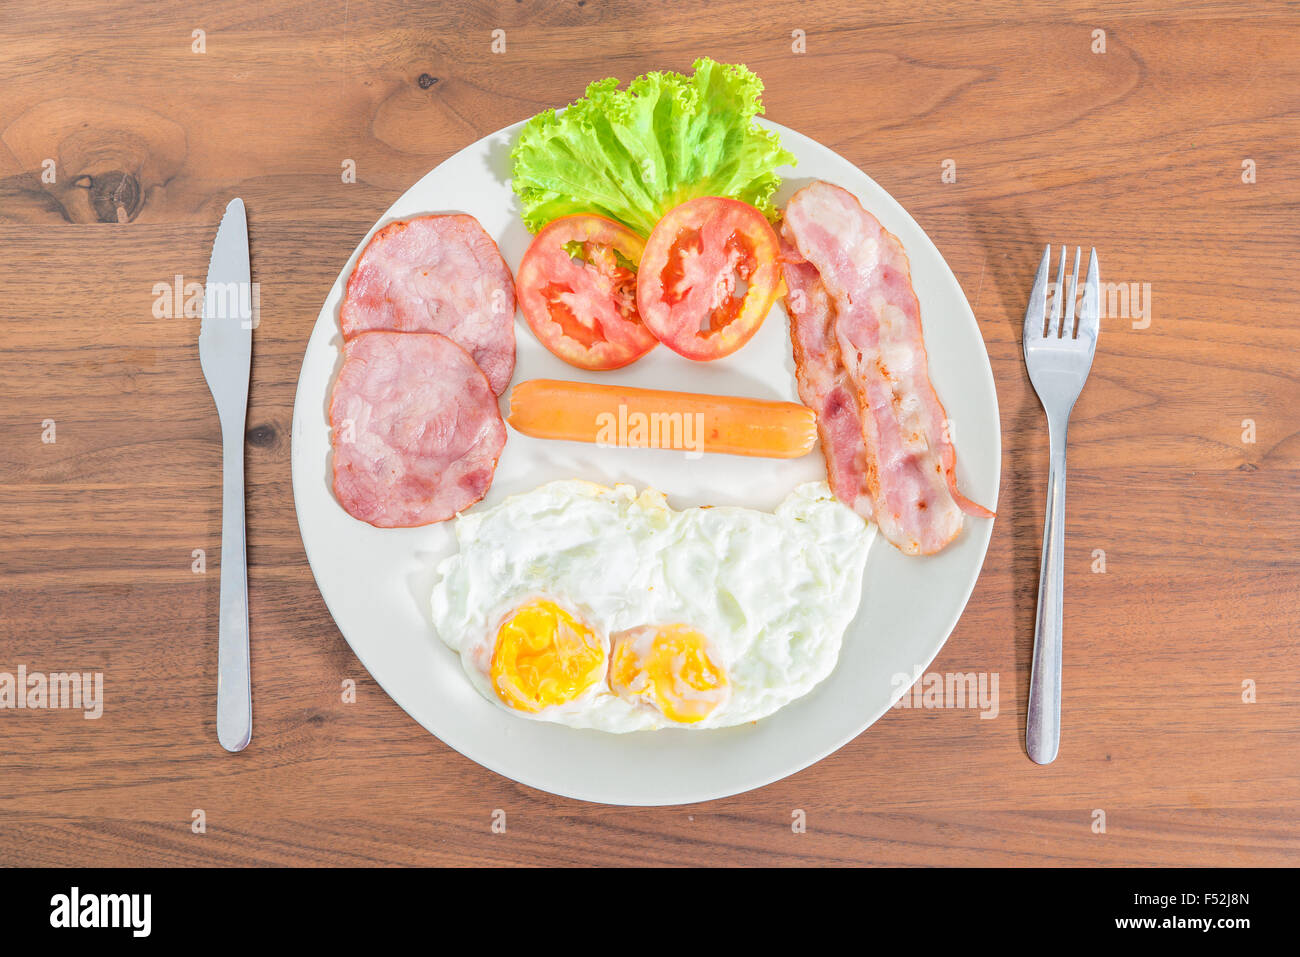 English breakfast with fried eggs, bacon, sausages, ham and fresh salad Stock Photo